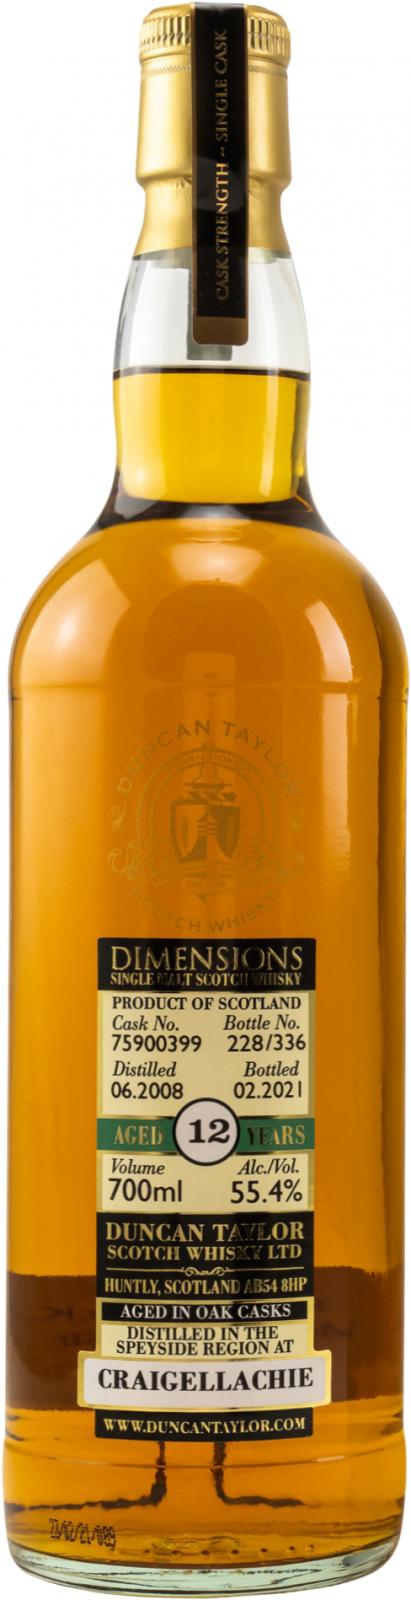 Craigellachie Dimensions Single Cask #75900399 2008 12 Year Old Whisky | 700ML